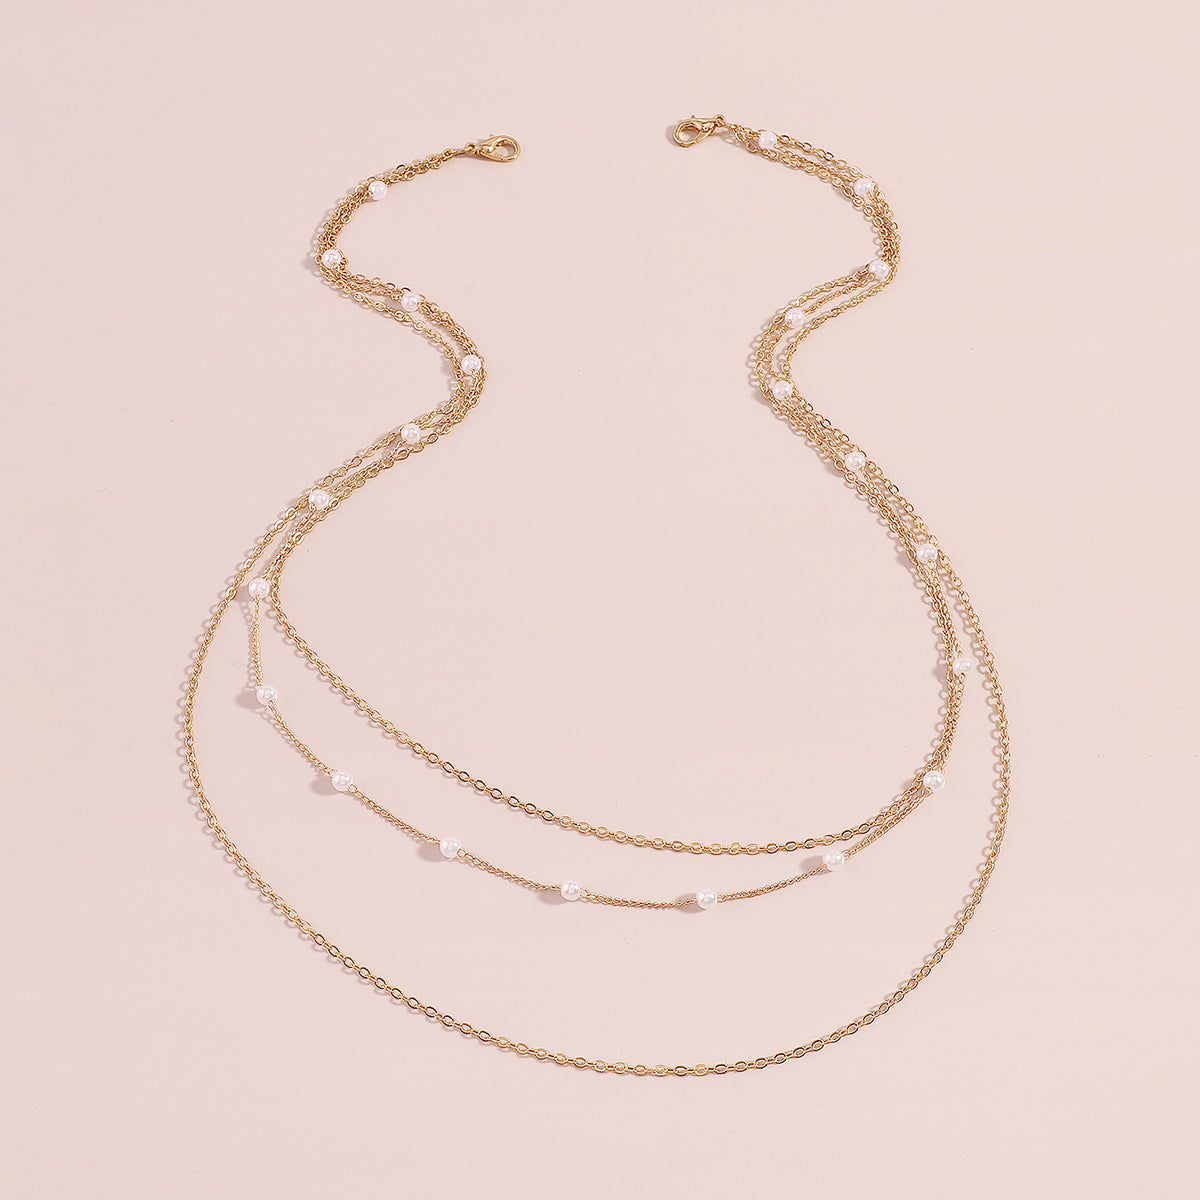 Simple Style Lines Imitation Pearl Iron Chain Women's Layered Necklaces